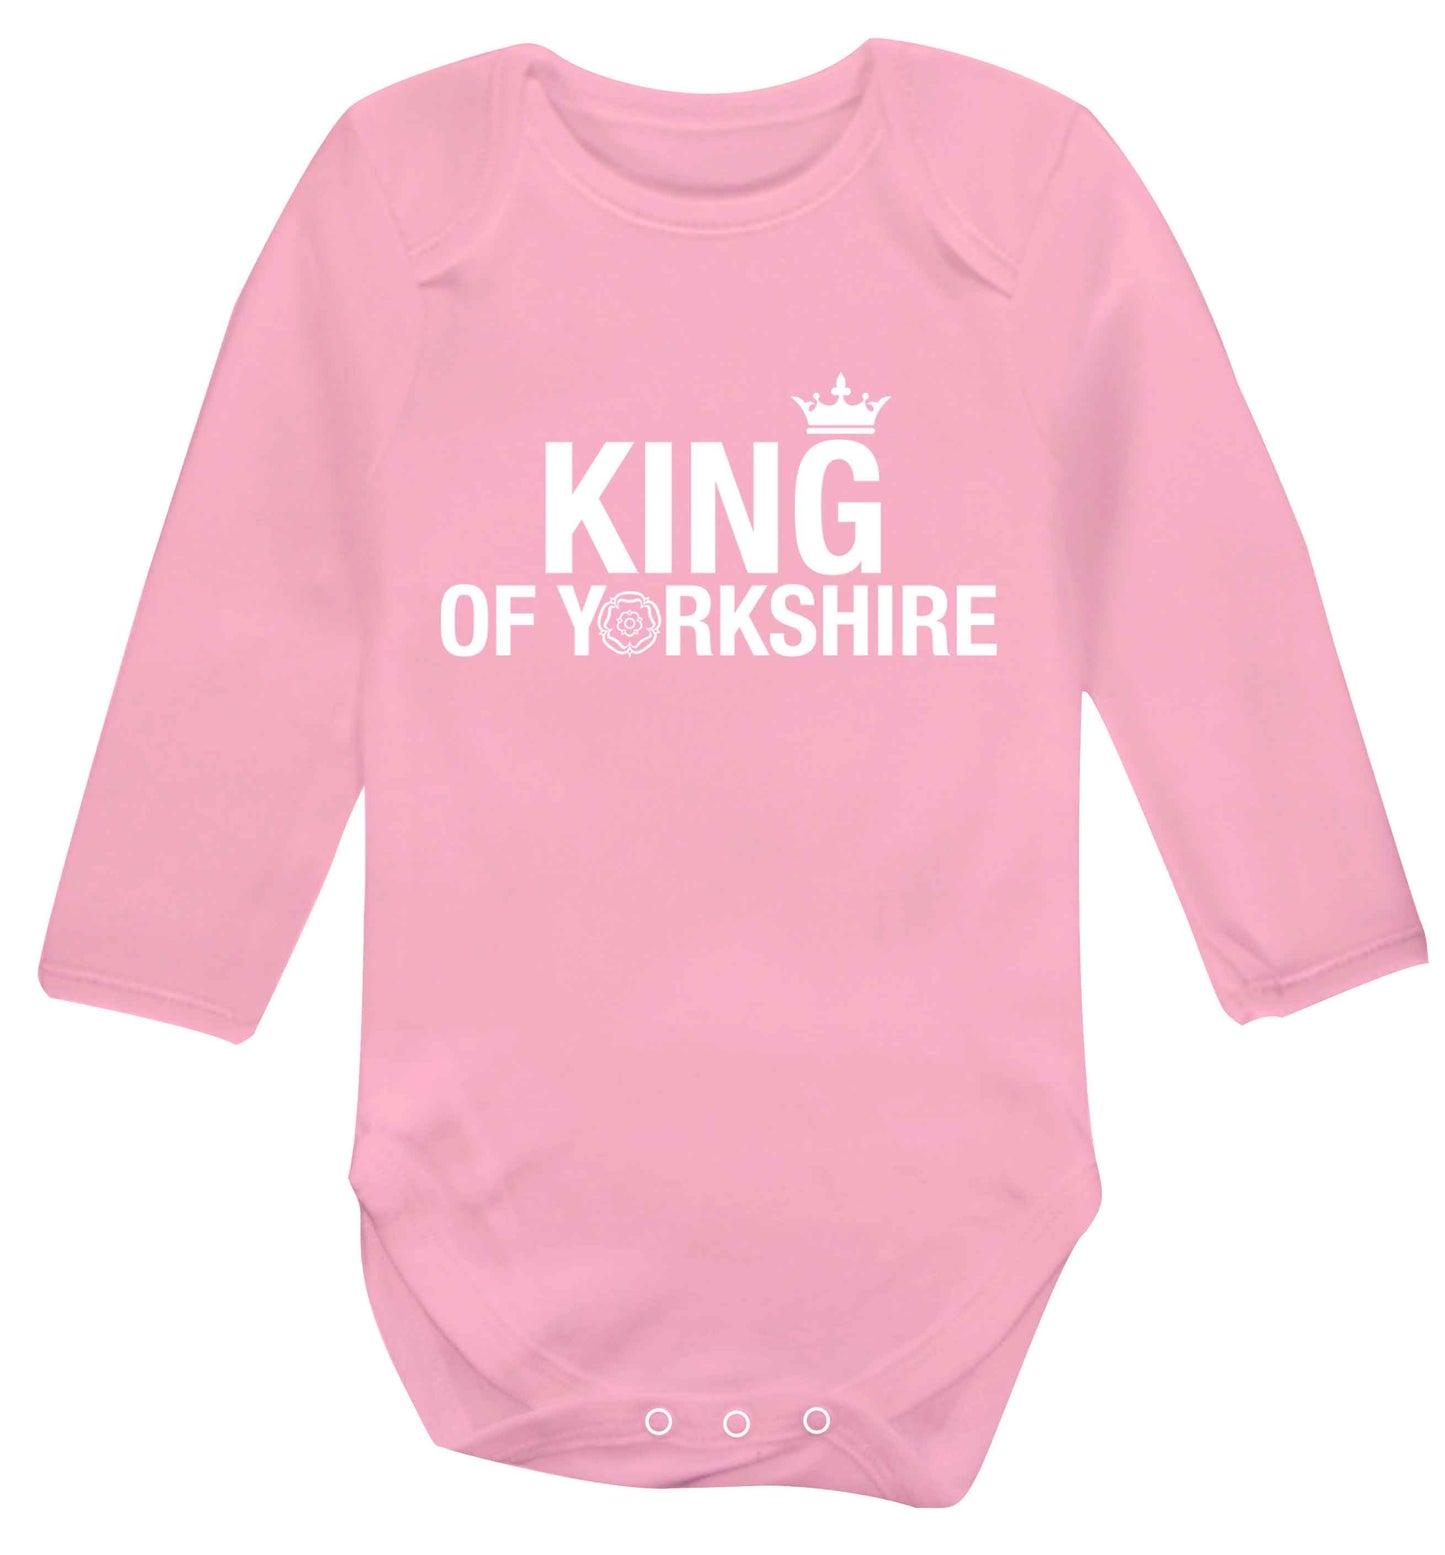 King of Yorkshire Baby Vest long sleeved pale pink 6-12 months